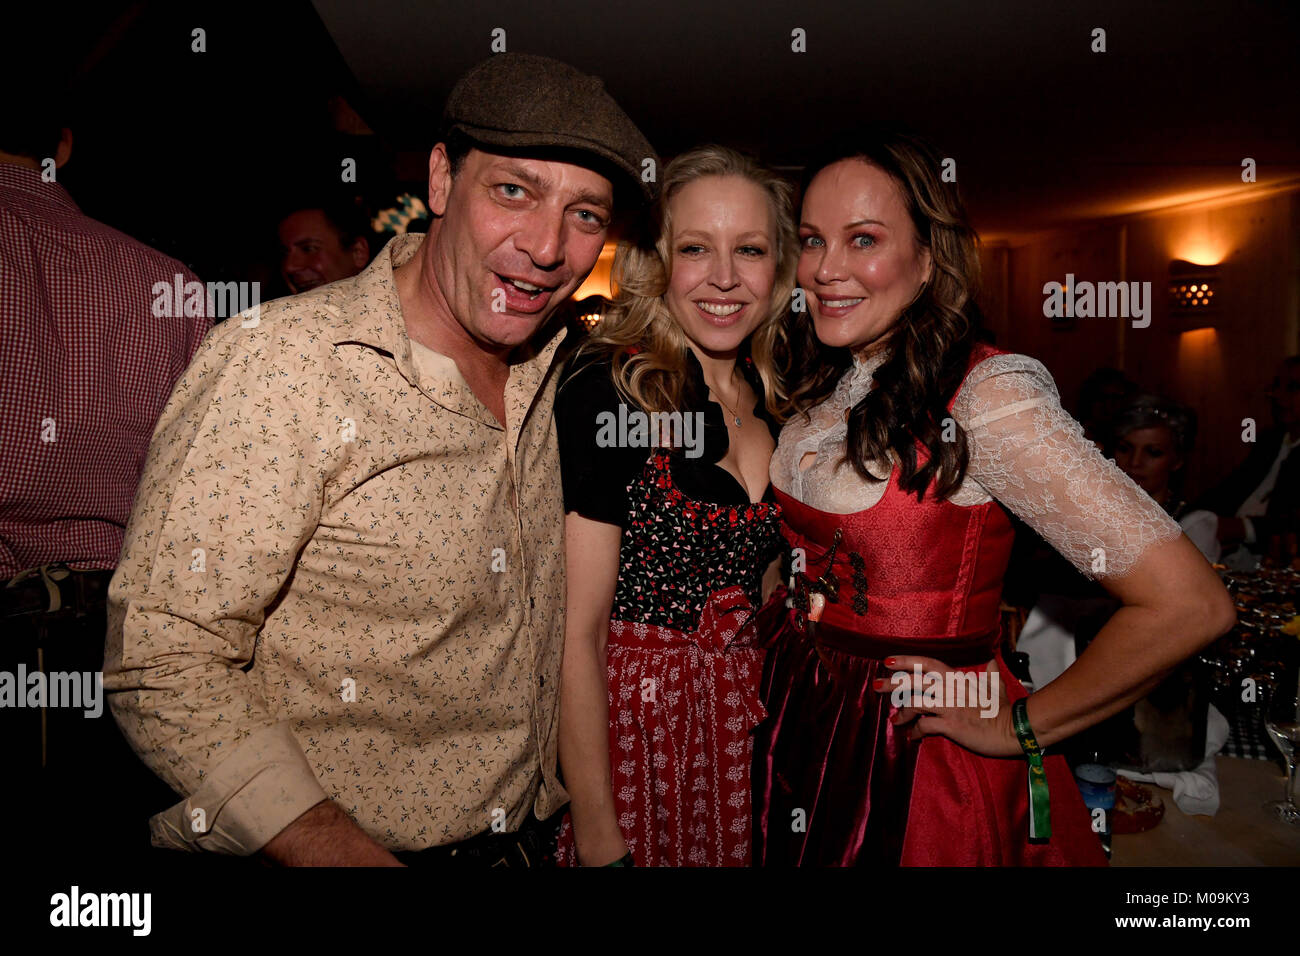 Actor Gregor Bloéb (L-R), his wife Nina Proll  and actress Sonja Kirchberger  attend the 27th traditional 'Weisswurst party' (lit. Bavarian white sausage party) at the Stanglwirt Inn in Going, Germany, 19 January 2018. The 'Weisswurst party' is an event where stars and celebrities meet a day before the legendary Hahnenkamm downhill race. Photo: Felix Hörhager/dpa Stock Photo